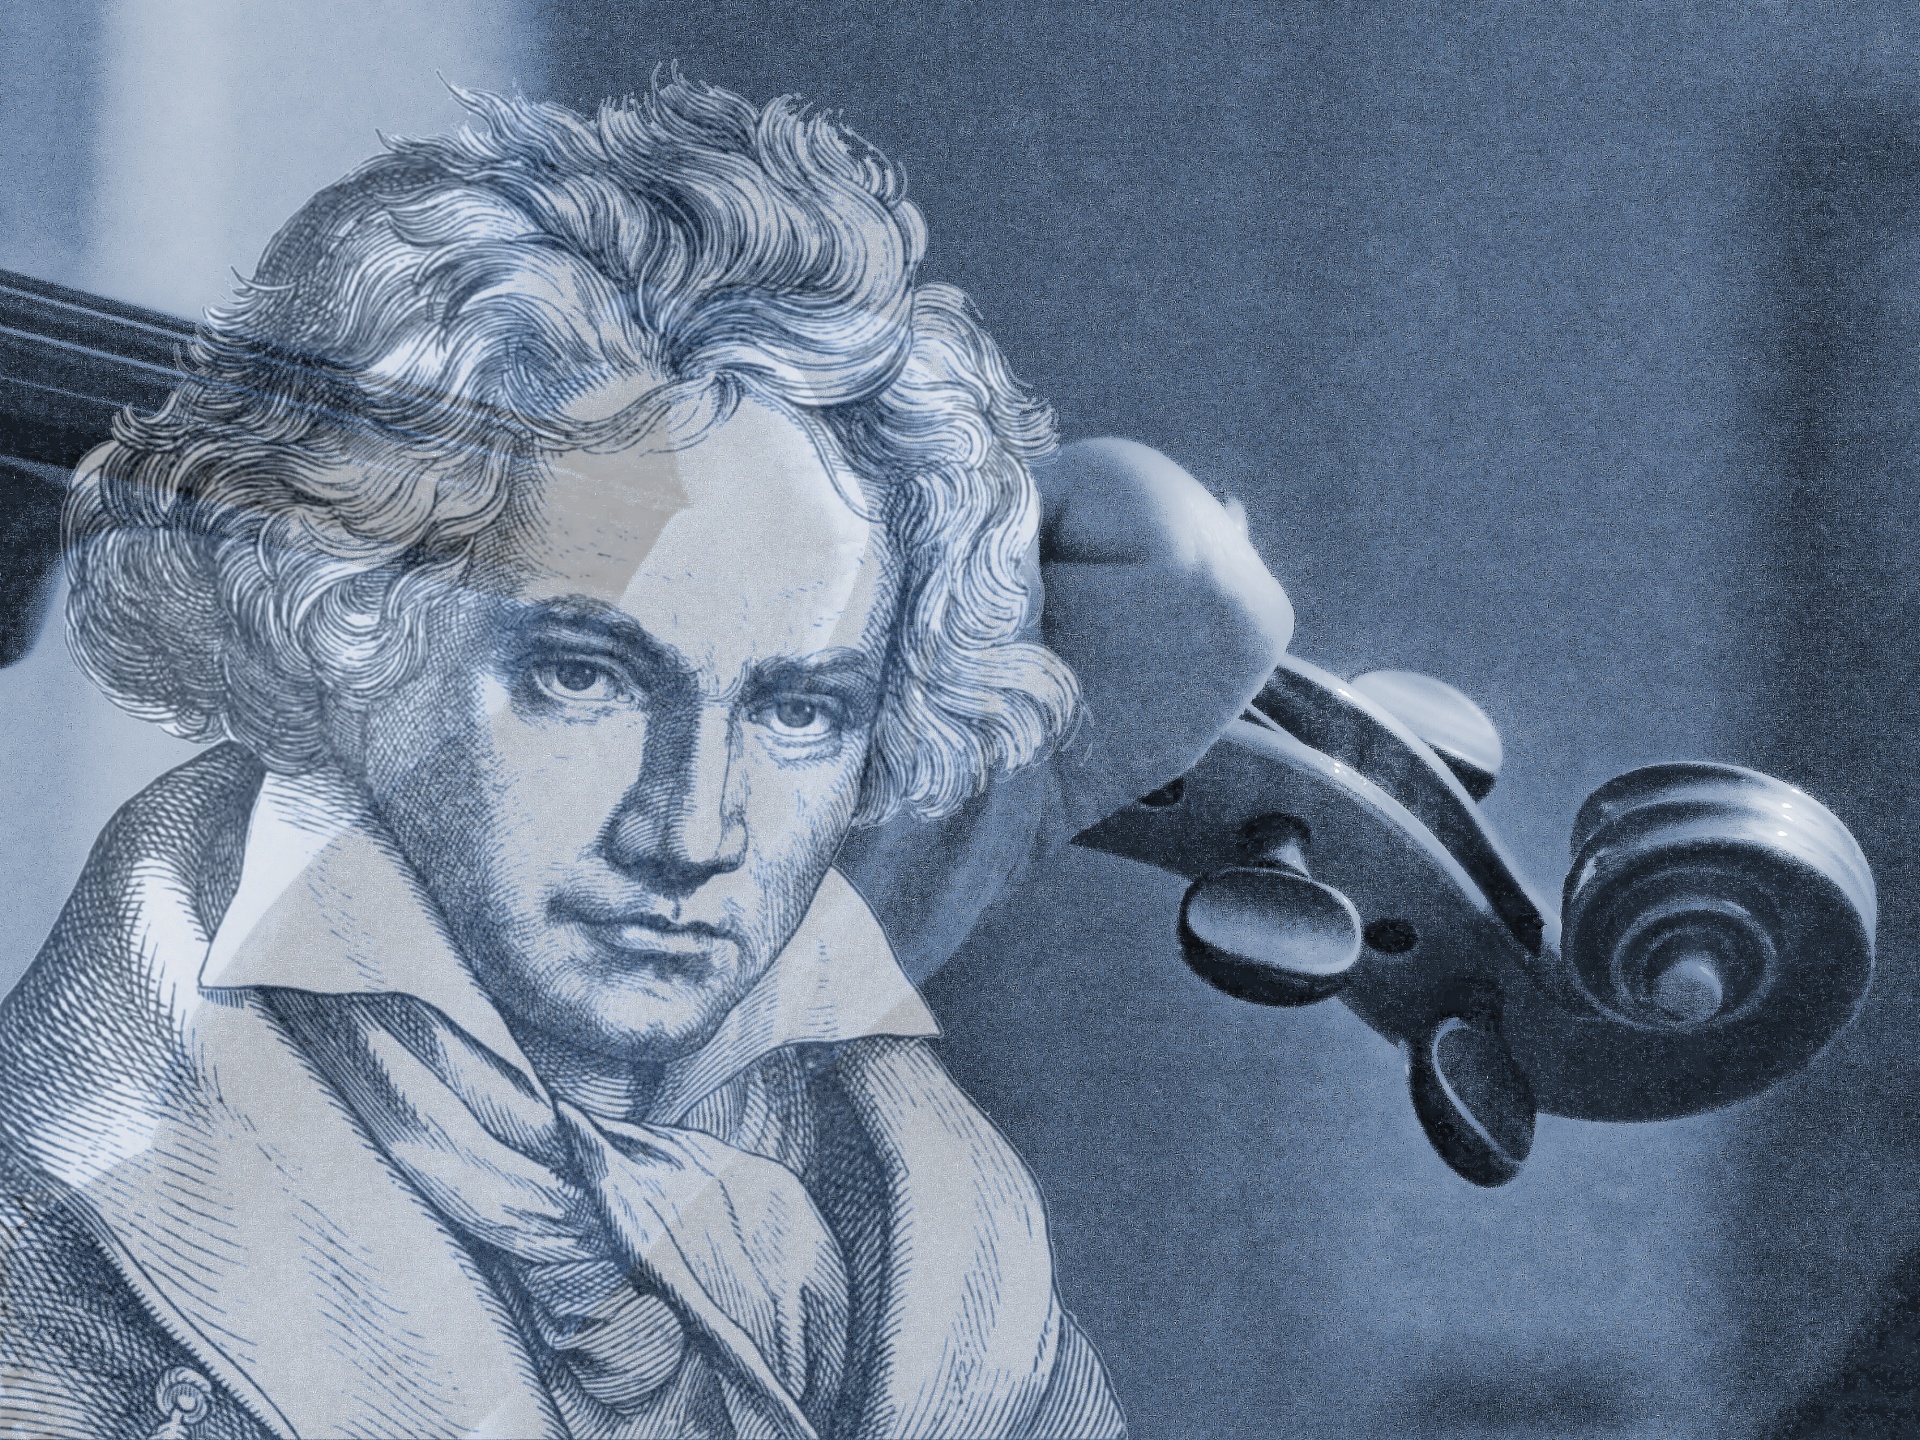 Layered image of Beethoven and a violinist